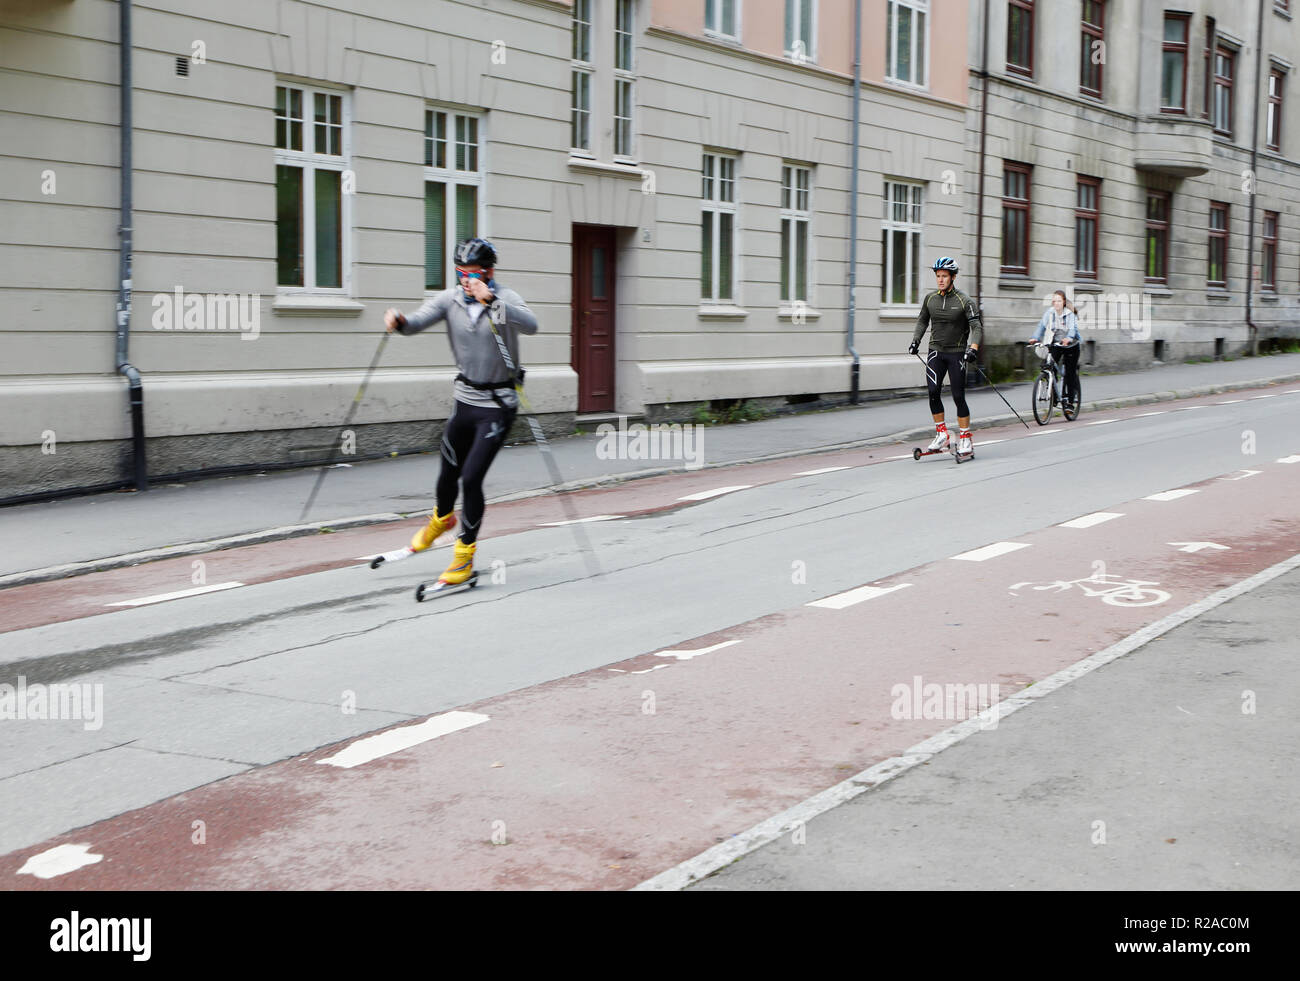 Trondheim, Norway - September 26, 2015: Two males on rollerskis near the university. Stock Photo